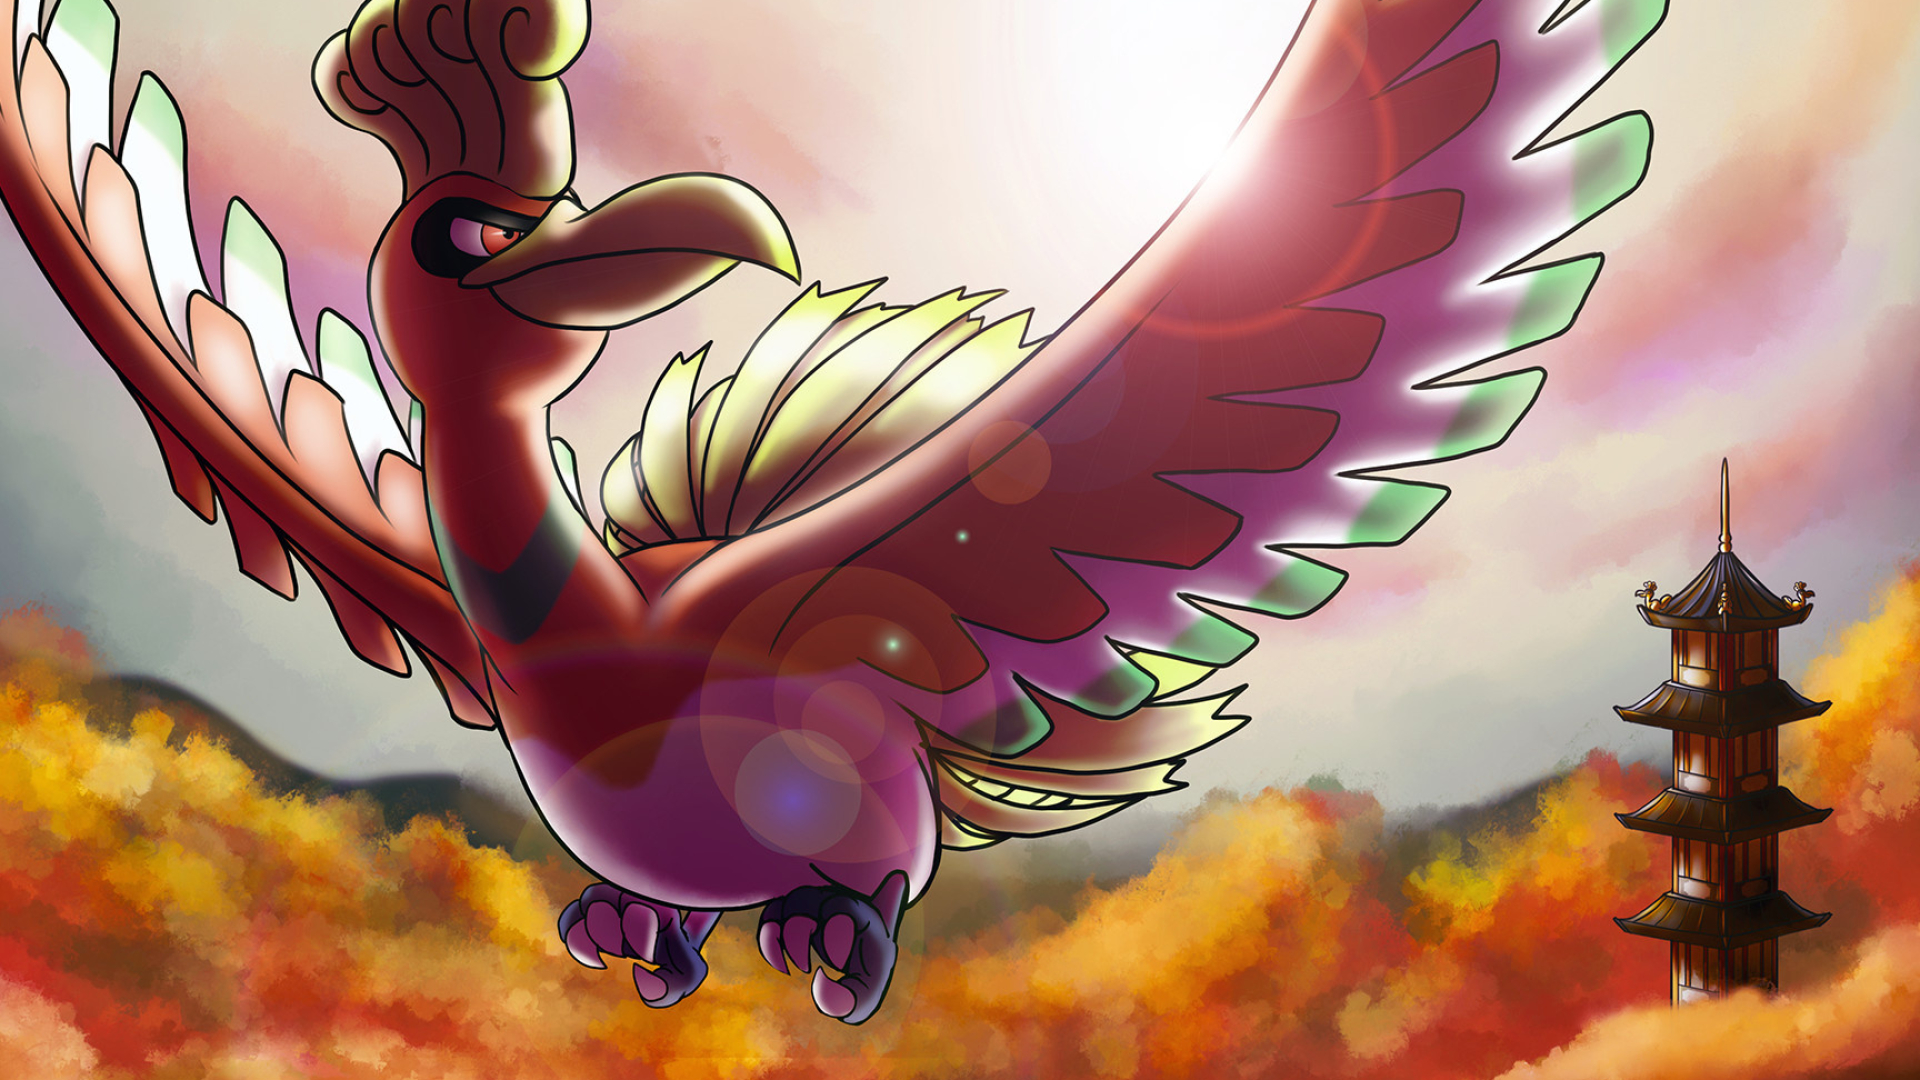 Ho-Oh and the Tin Tower, Commissioned piece, 1920x1080 Full HD Desktop